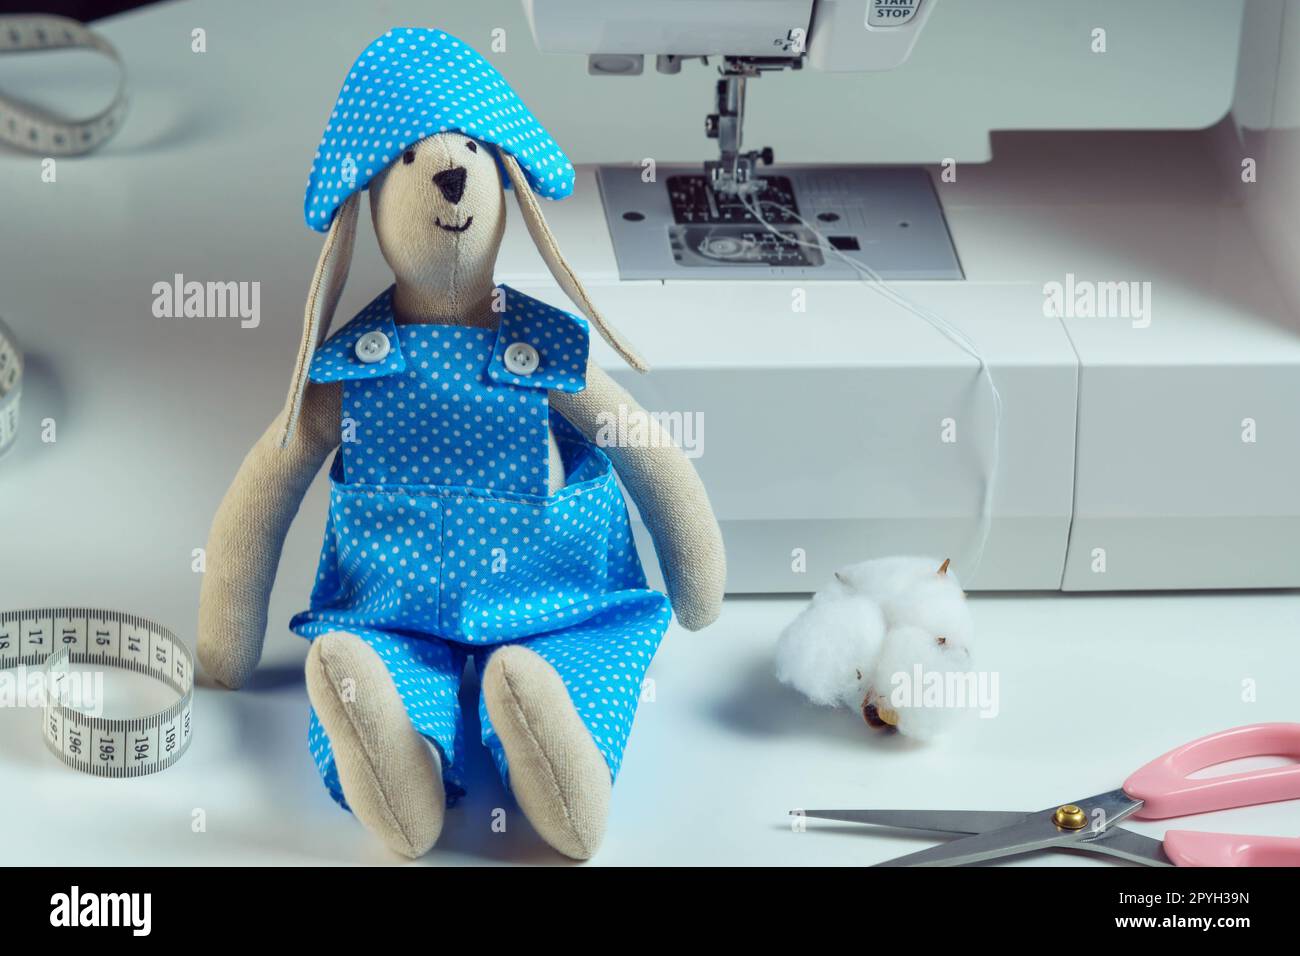 Funny smiling sewed stuffed rabbit toy in blue overalls, cocked hat, sit near cotton, scissors, next to sewing machine Stock Photo